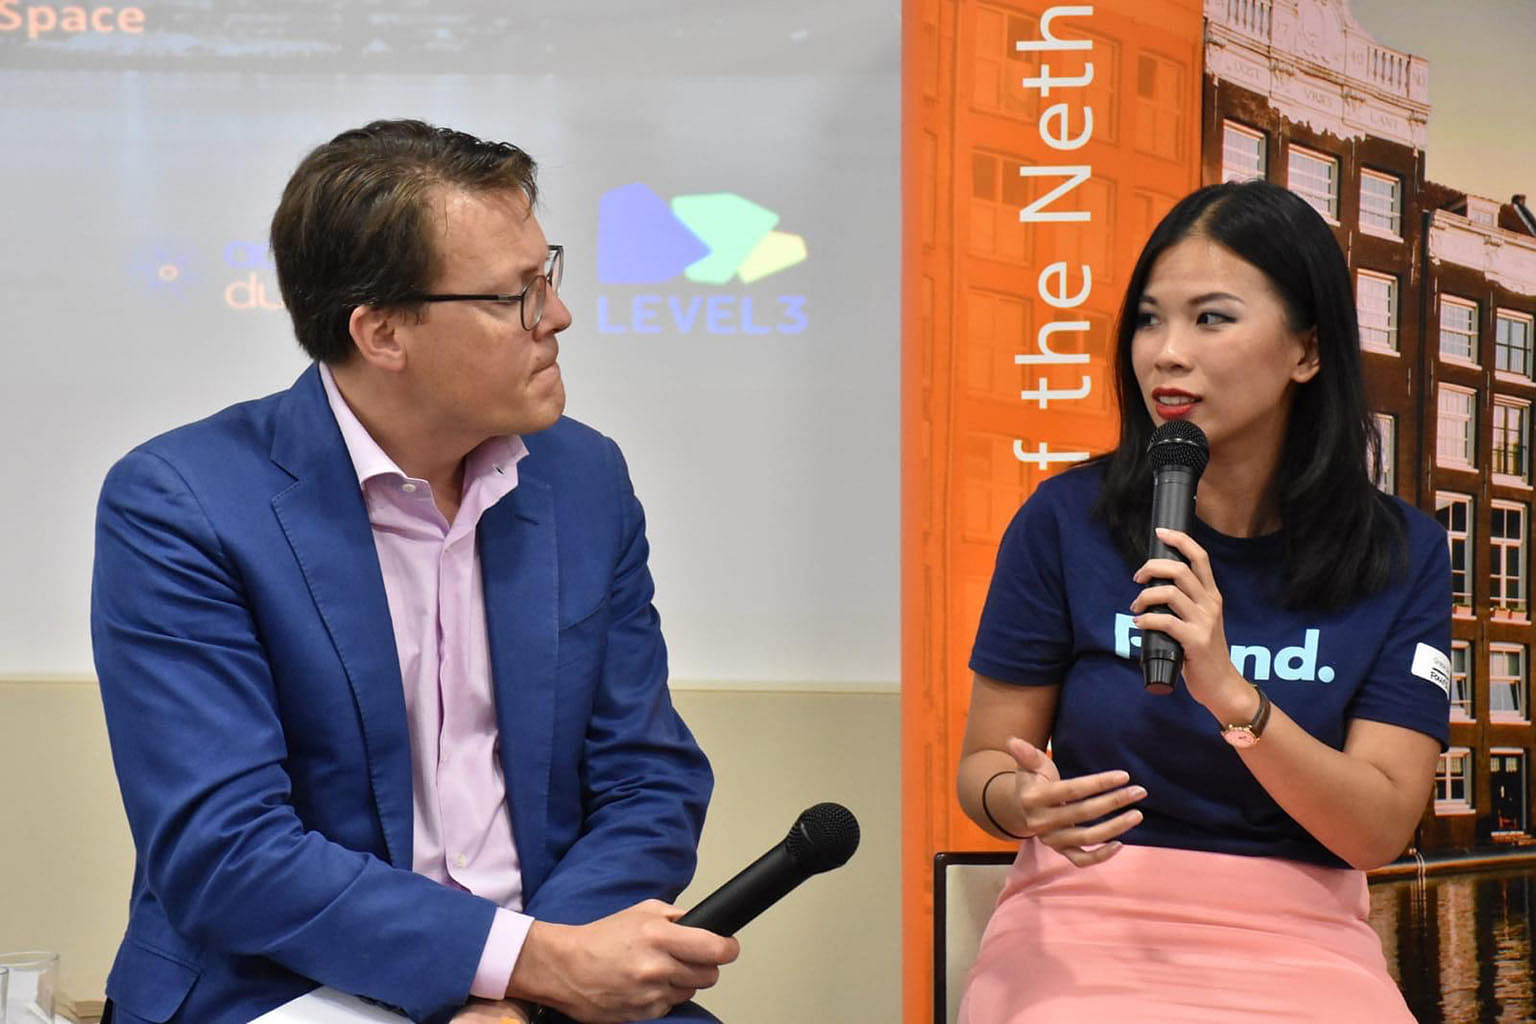 Ms Grace Sai with Prince Constantijn of the Netherlands in a panel discussion about the journey and struggles of a start-up founder held at the Unilever headquarters in Singapore in 2018. Co-working start-up pioneer Grace Sai is co-founder of Found8,